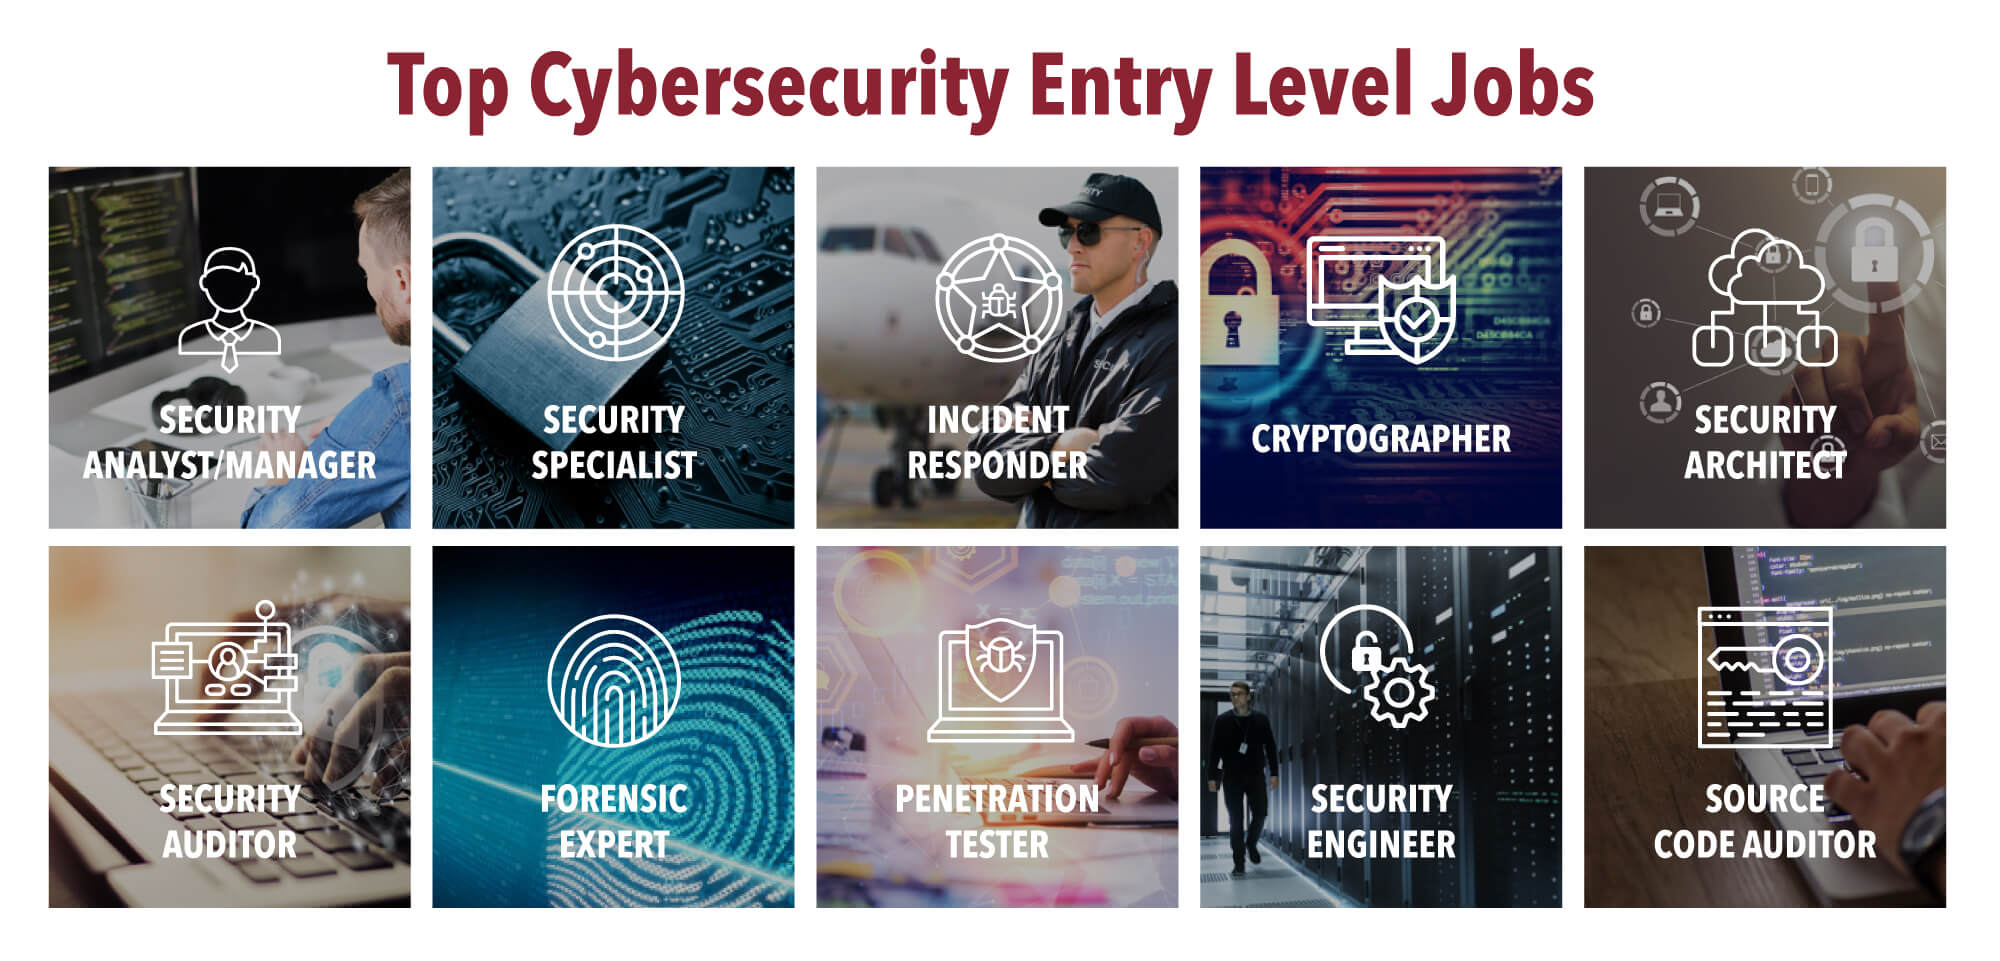 The top ten entry-level cybersecurity jobs